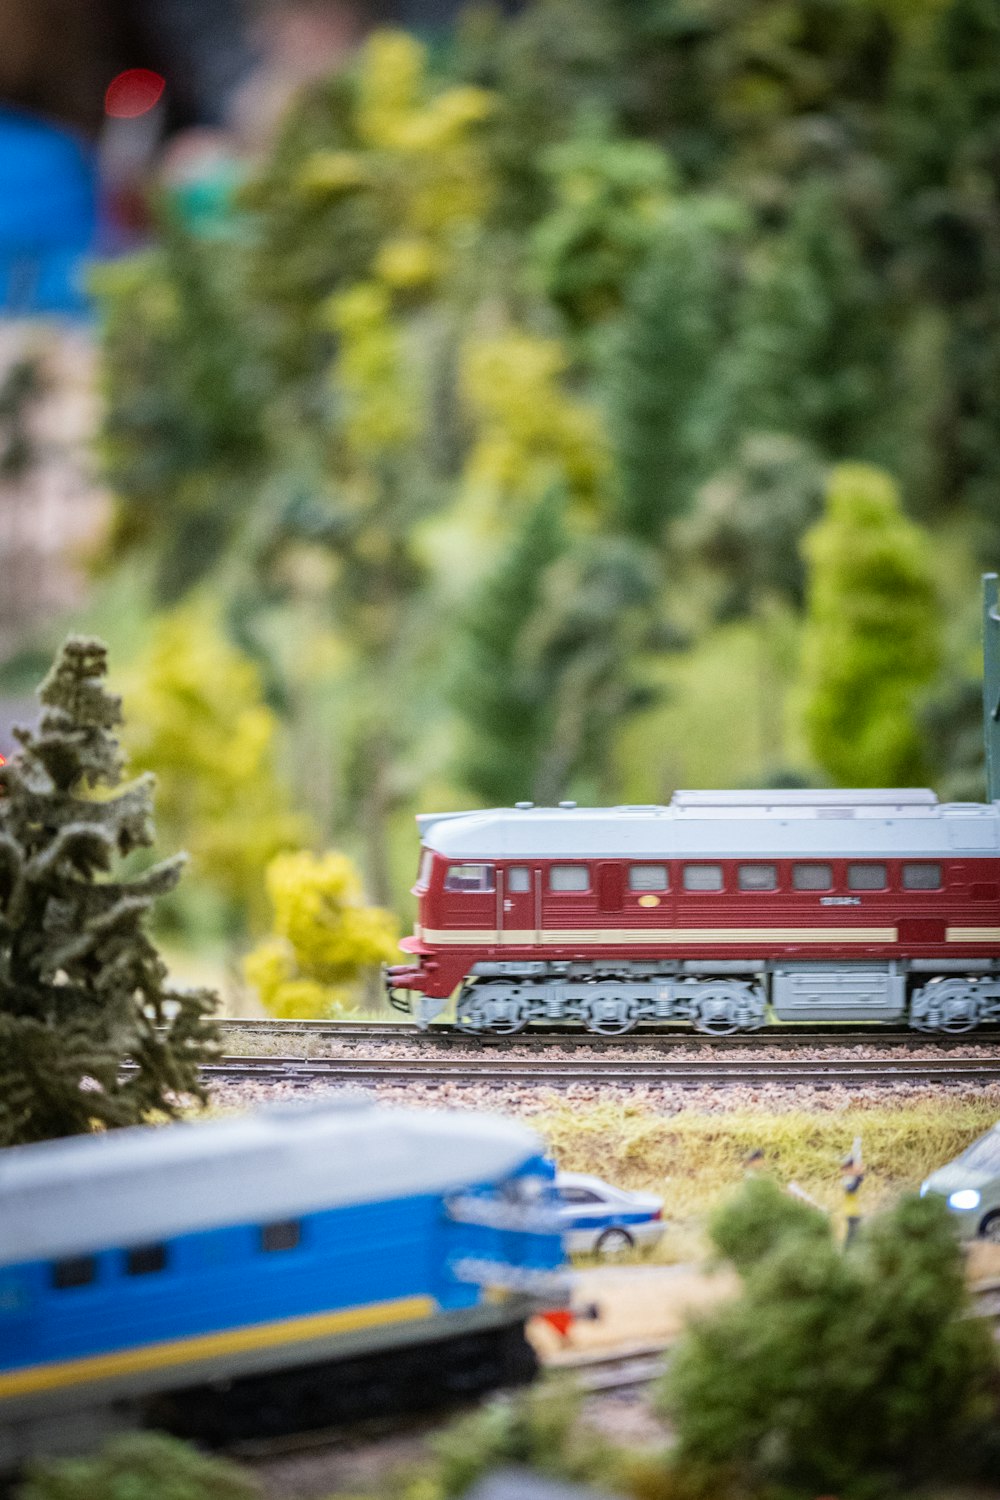 a model train set with a red and white train on the tracks